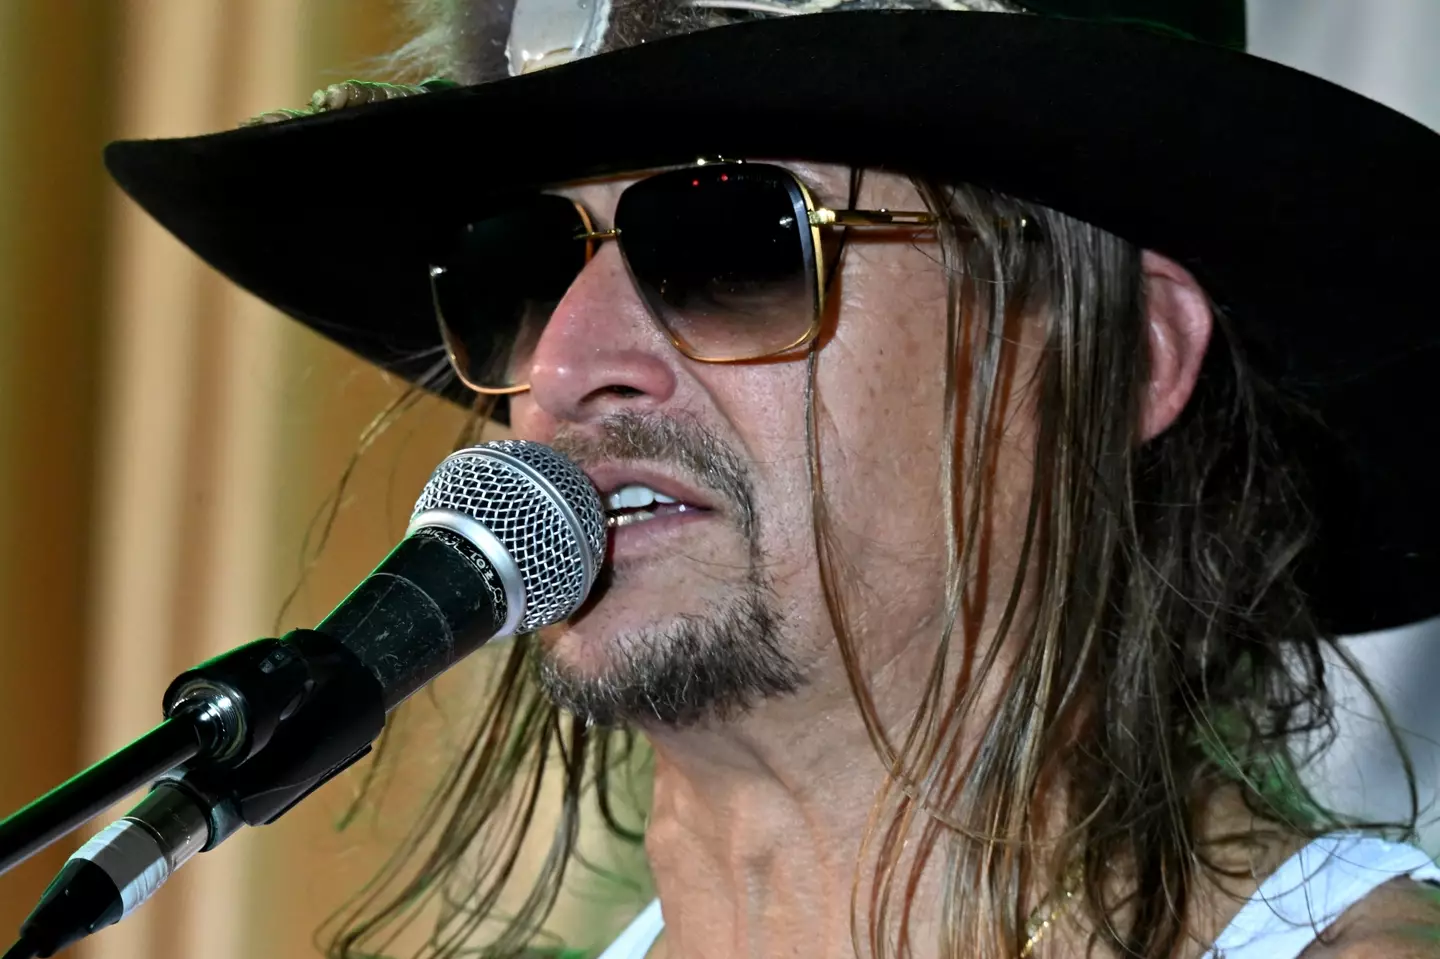 Kid Rock rose to fame in the 90s. (Stephen J. Cohen/Getty Images)